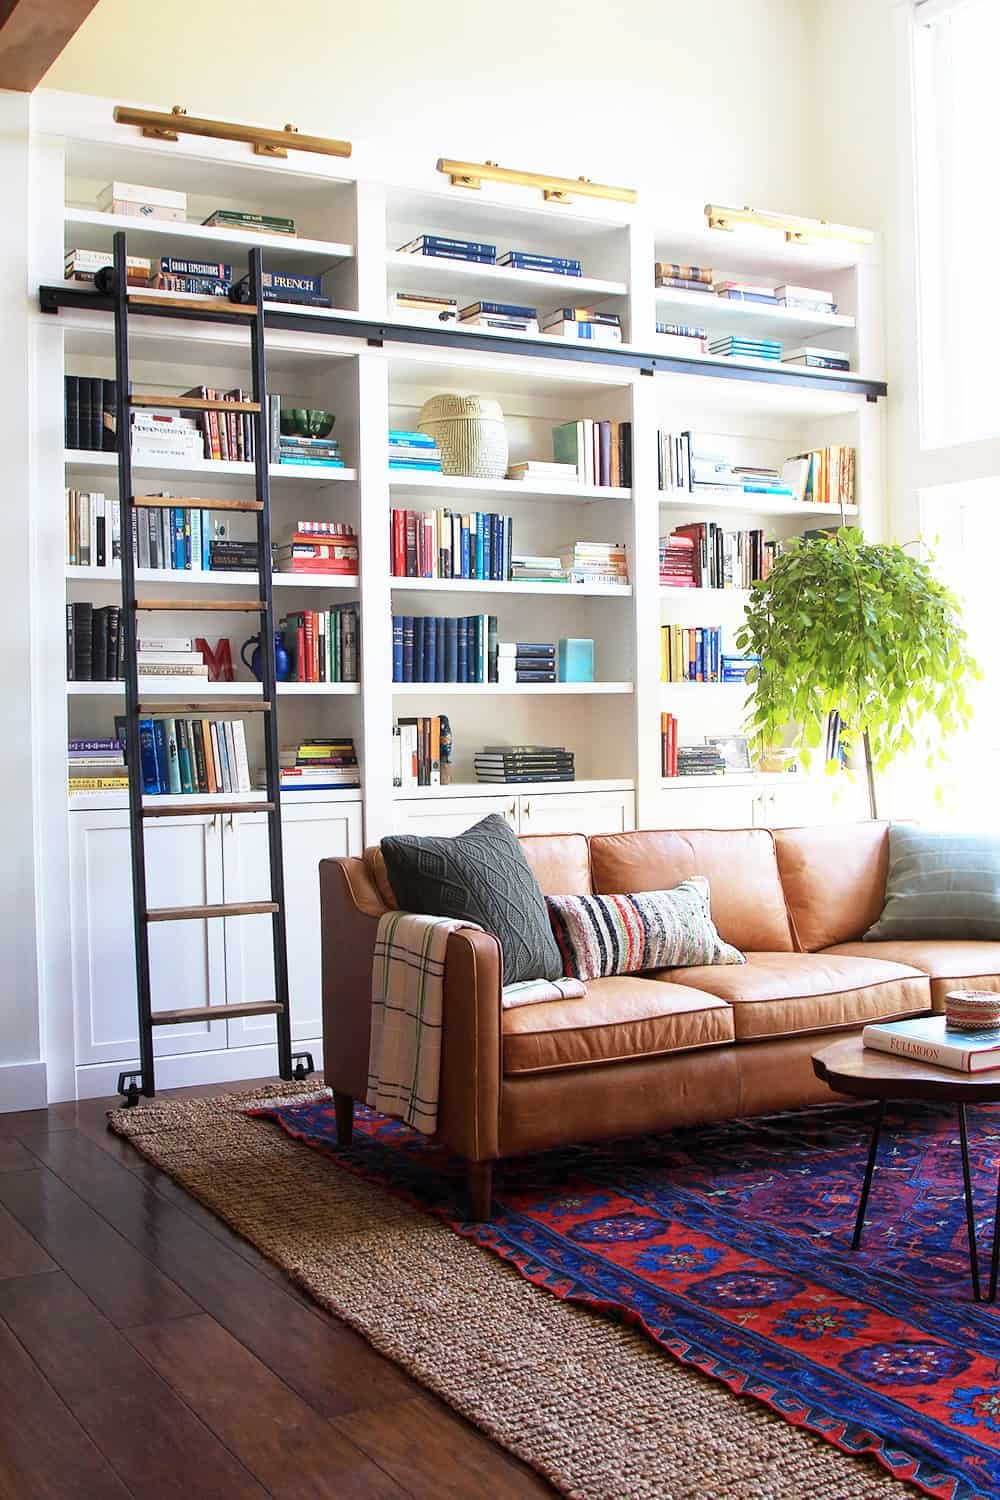 A living space with a cabinet stocked full of books and an intricate leather couch with layered rugs on the floor showing a colorful vintage rug put on top of a jute rug